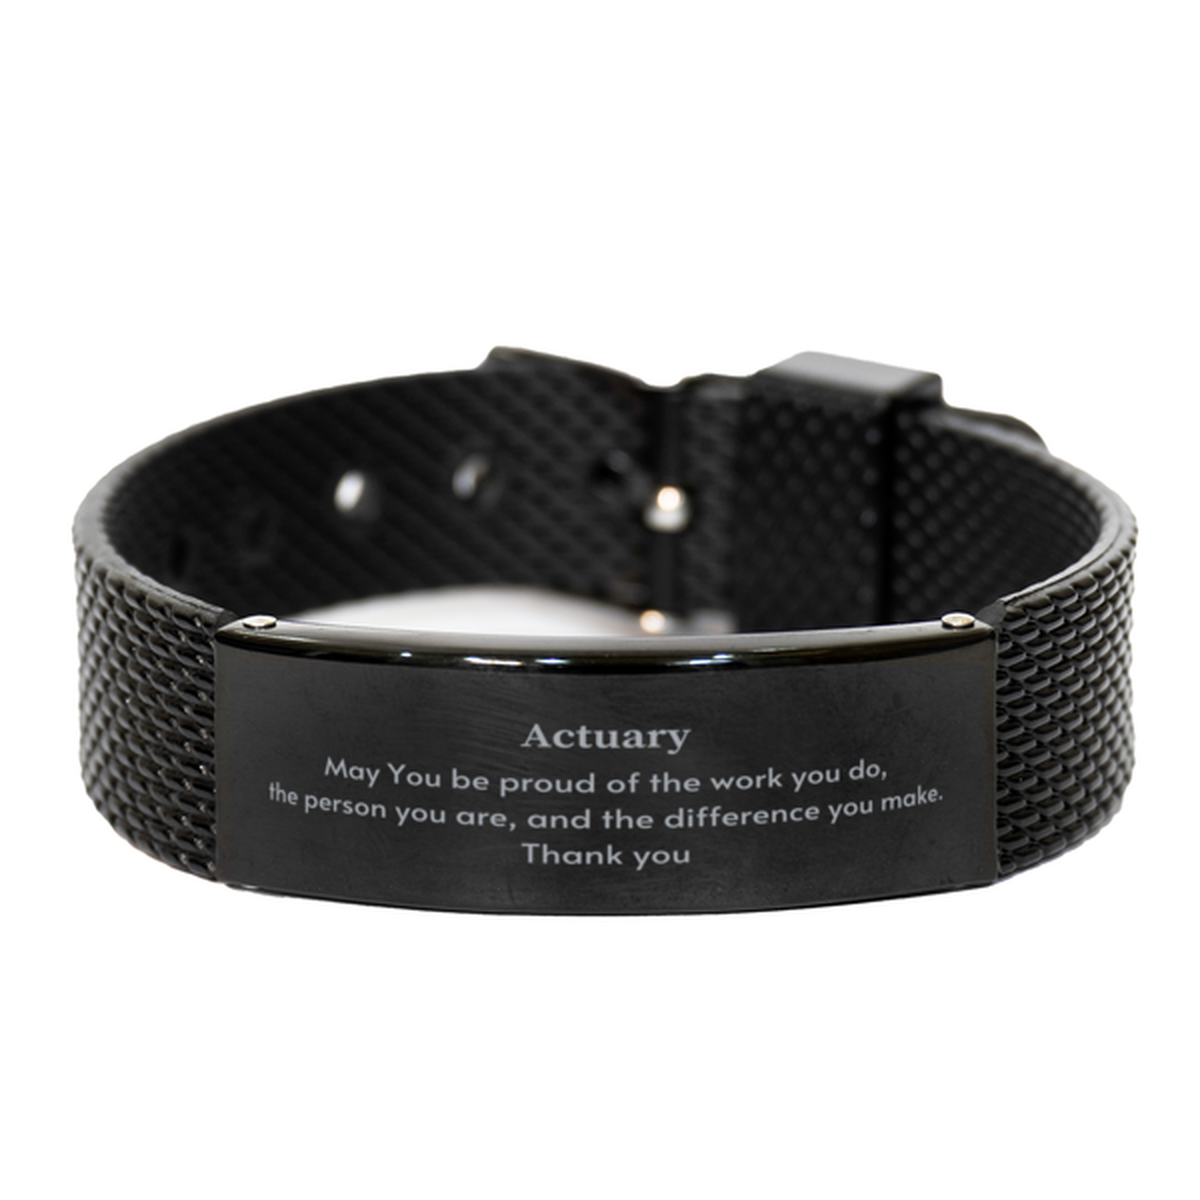 Heartwarming Black Shark Mesh Bracelet Retirement Coworkers Gifts for Actuary, Actuary May You be proud of the work you do, the person you are Gifts for Boss Men Women Friends